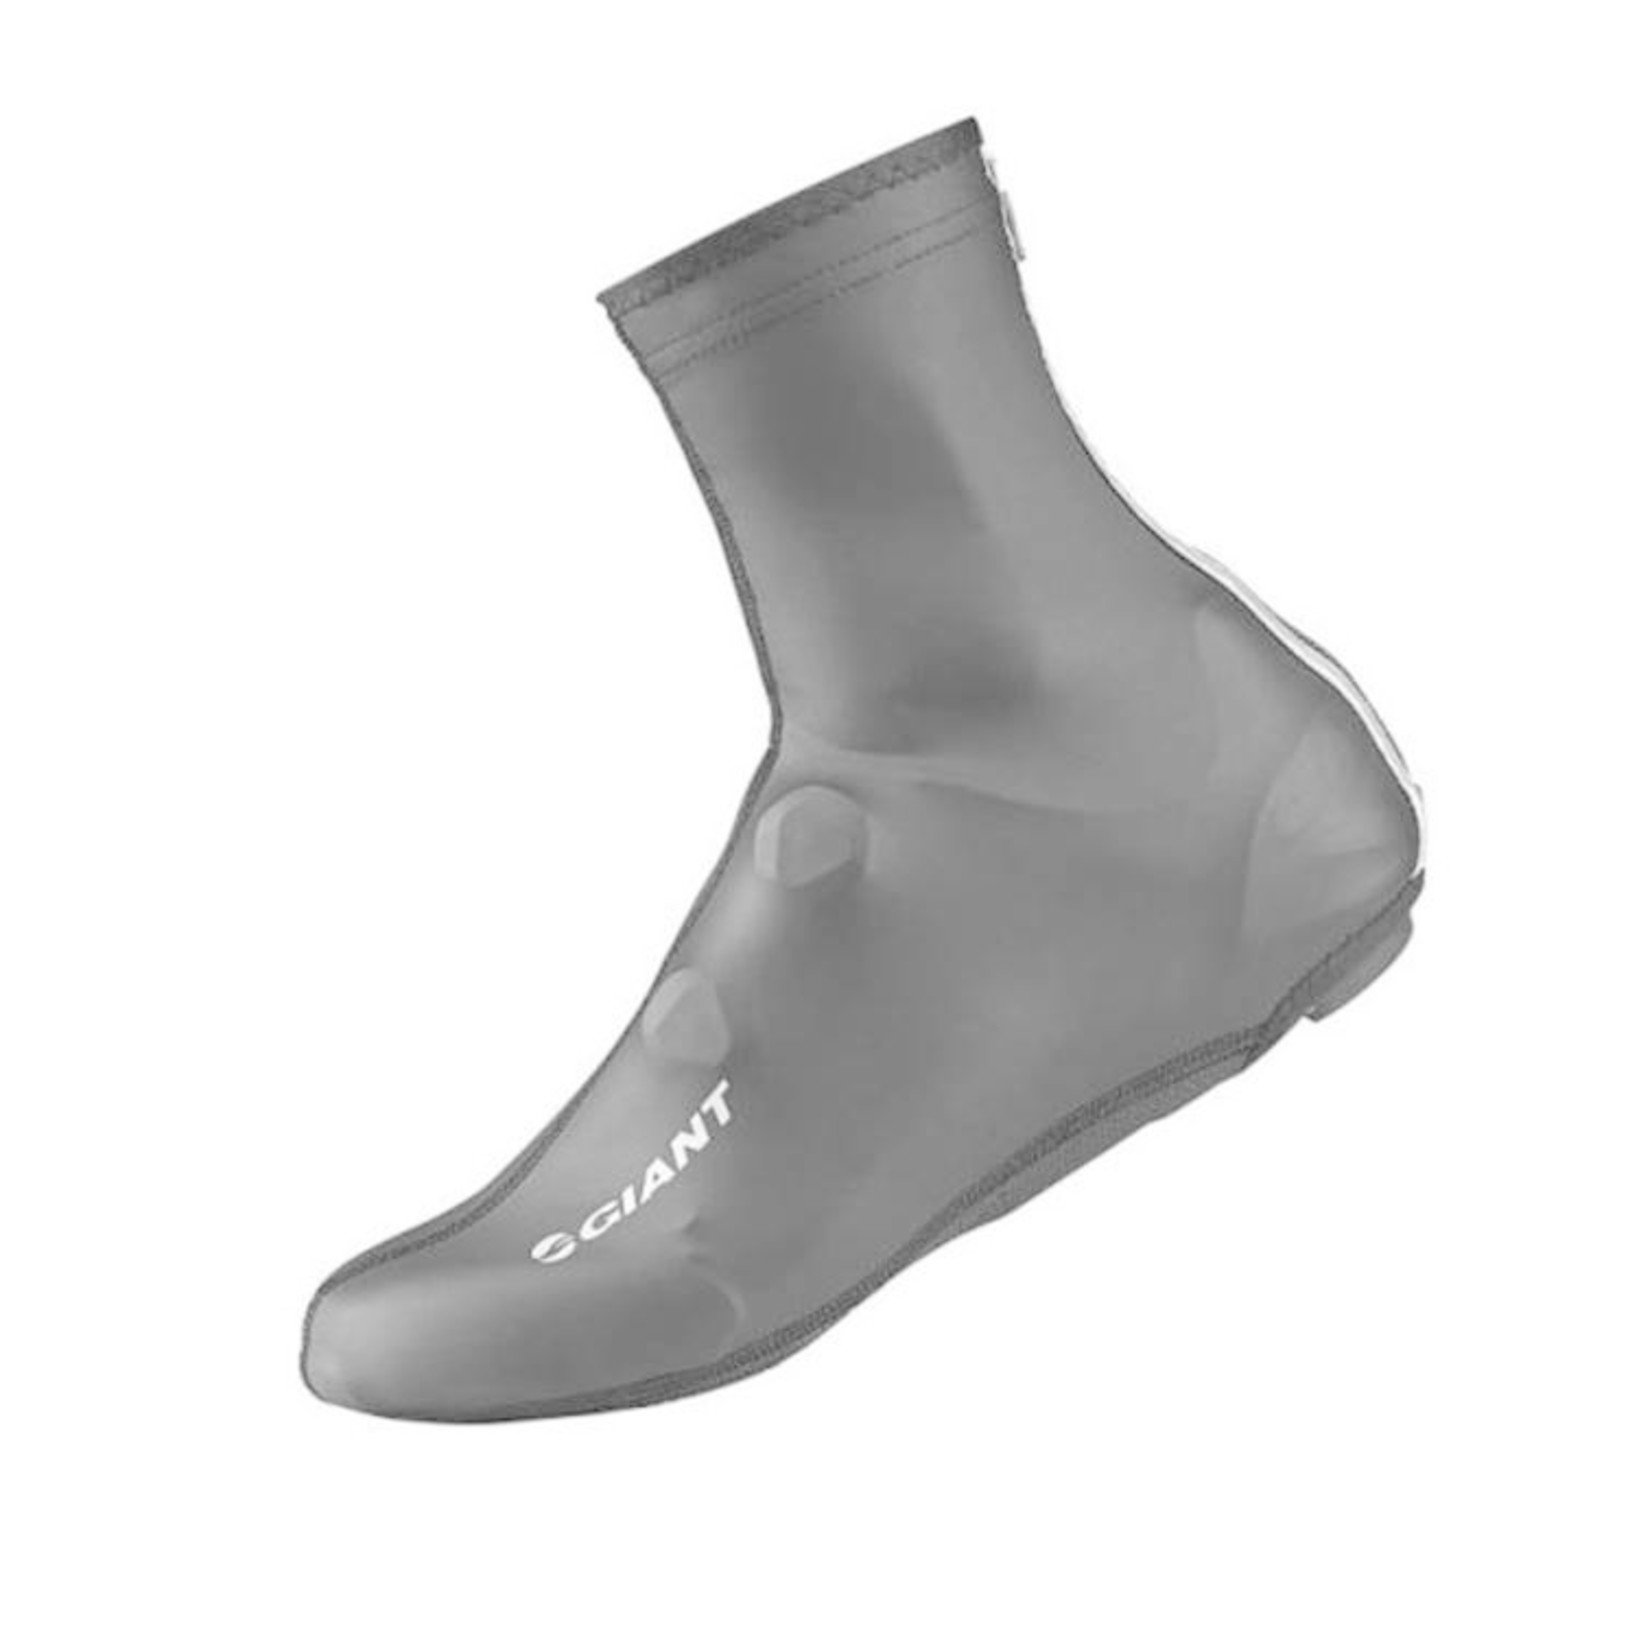 Giant Giant Cycling Shoe Covers Small